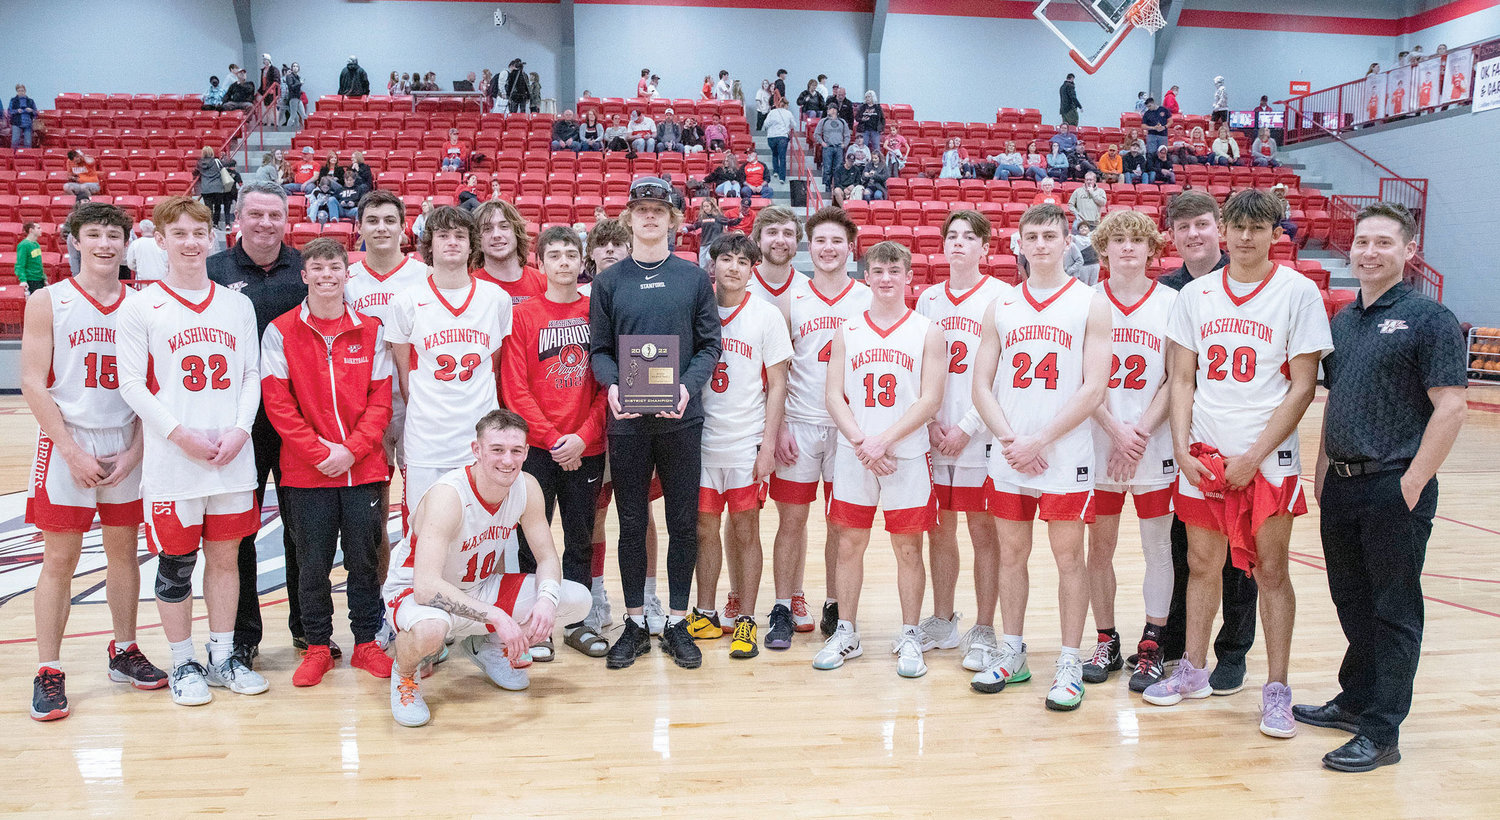 The Washington Warriors defeated Chisholm 75-43 to win the District tournament Saturday. They play Perry in the Regional tournament at 8:30 p.m. Friday in Perry.